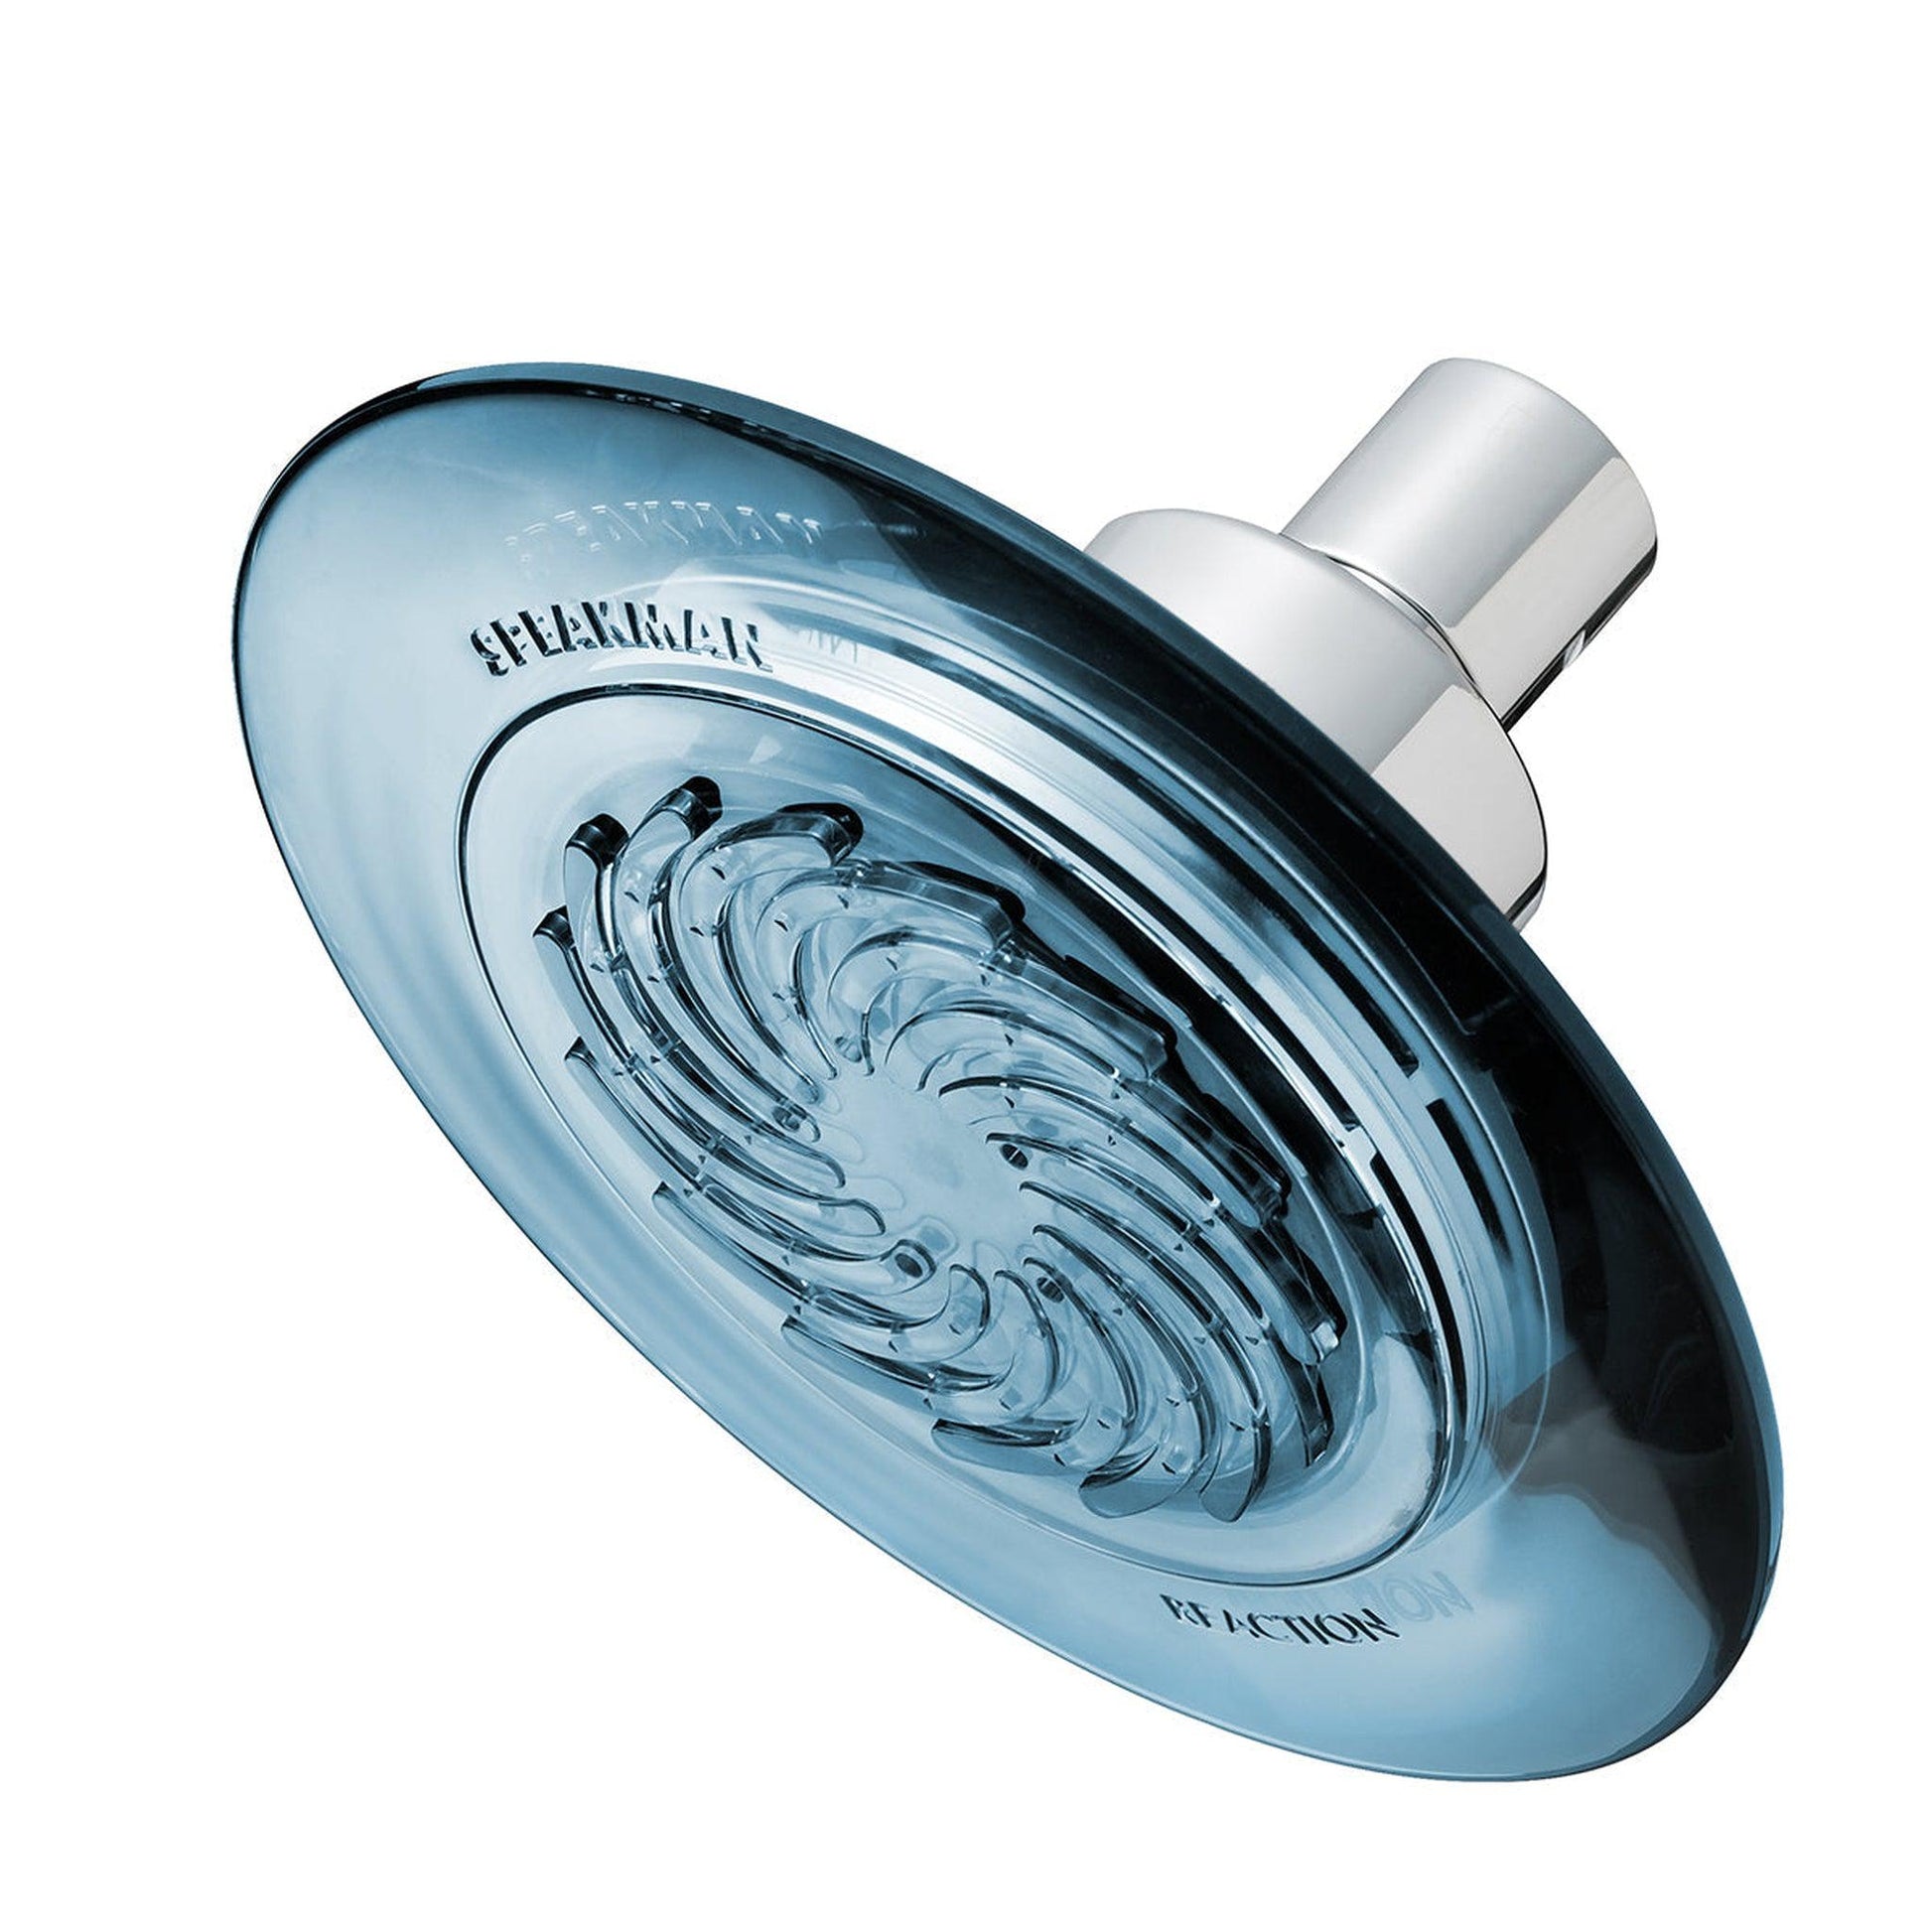 Speakman Reaction Blue and Polished Chrome Single-Function Spray Pattern 2.5 GPM Shower Head